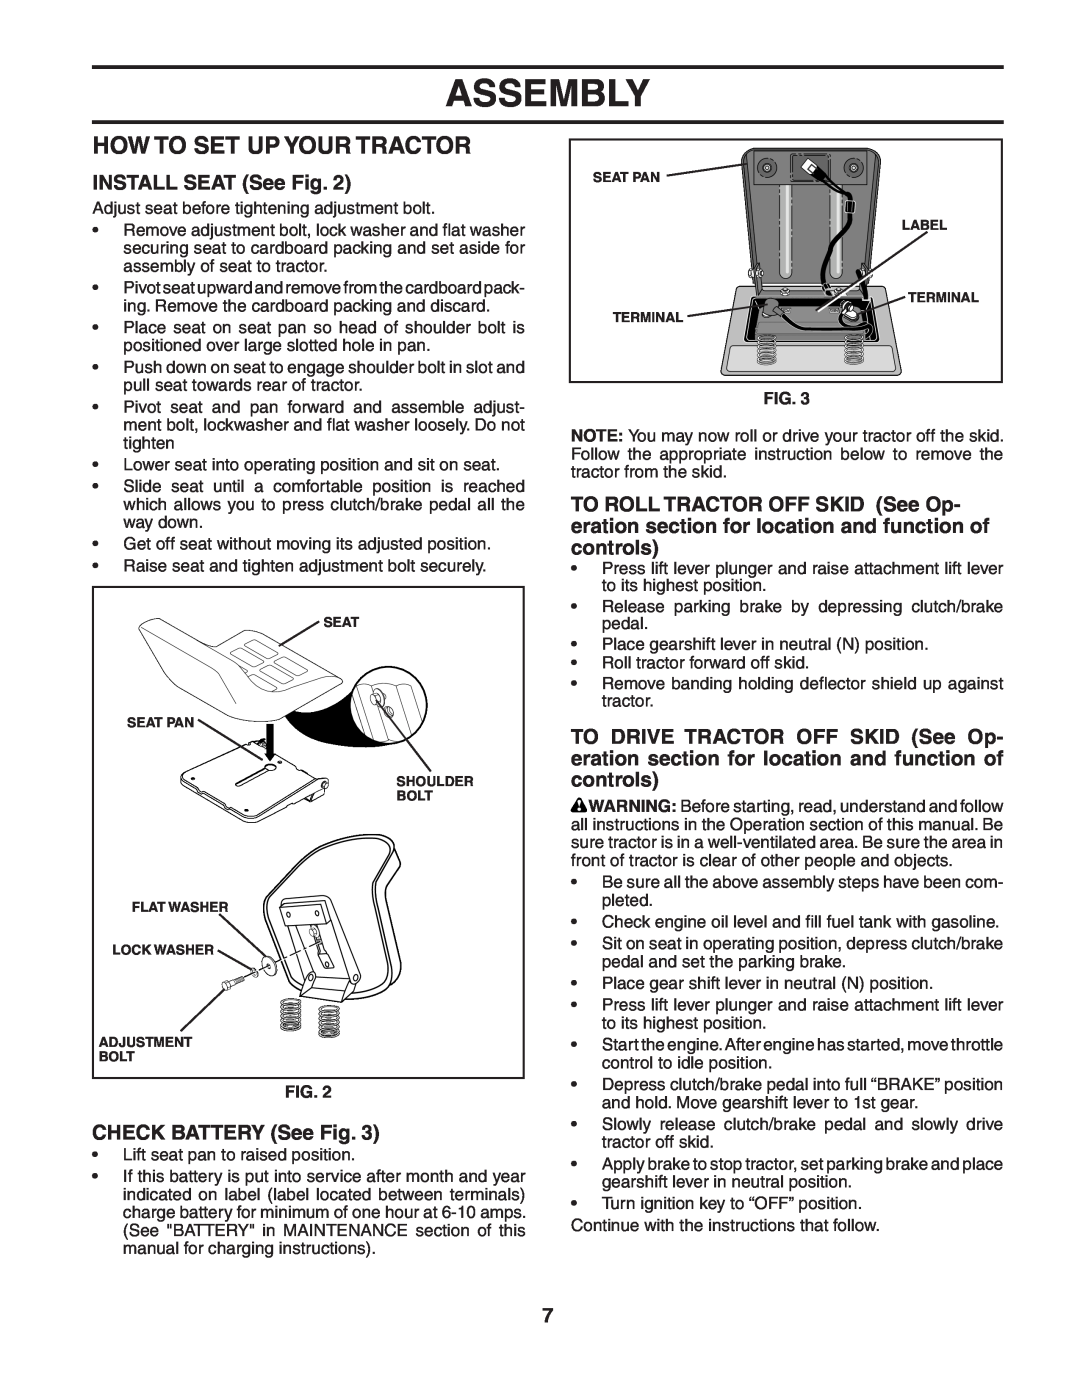 Poulan 187594 manual How To Set Up Your Tractor, INSTALL SEAT See Fig, CHECK BATTERY See Fig, Assembly 